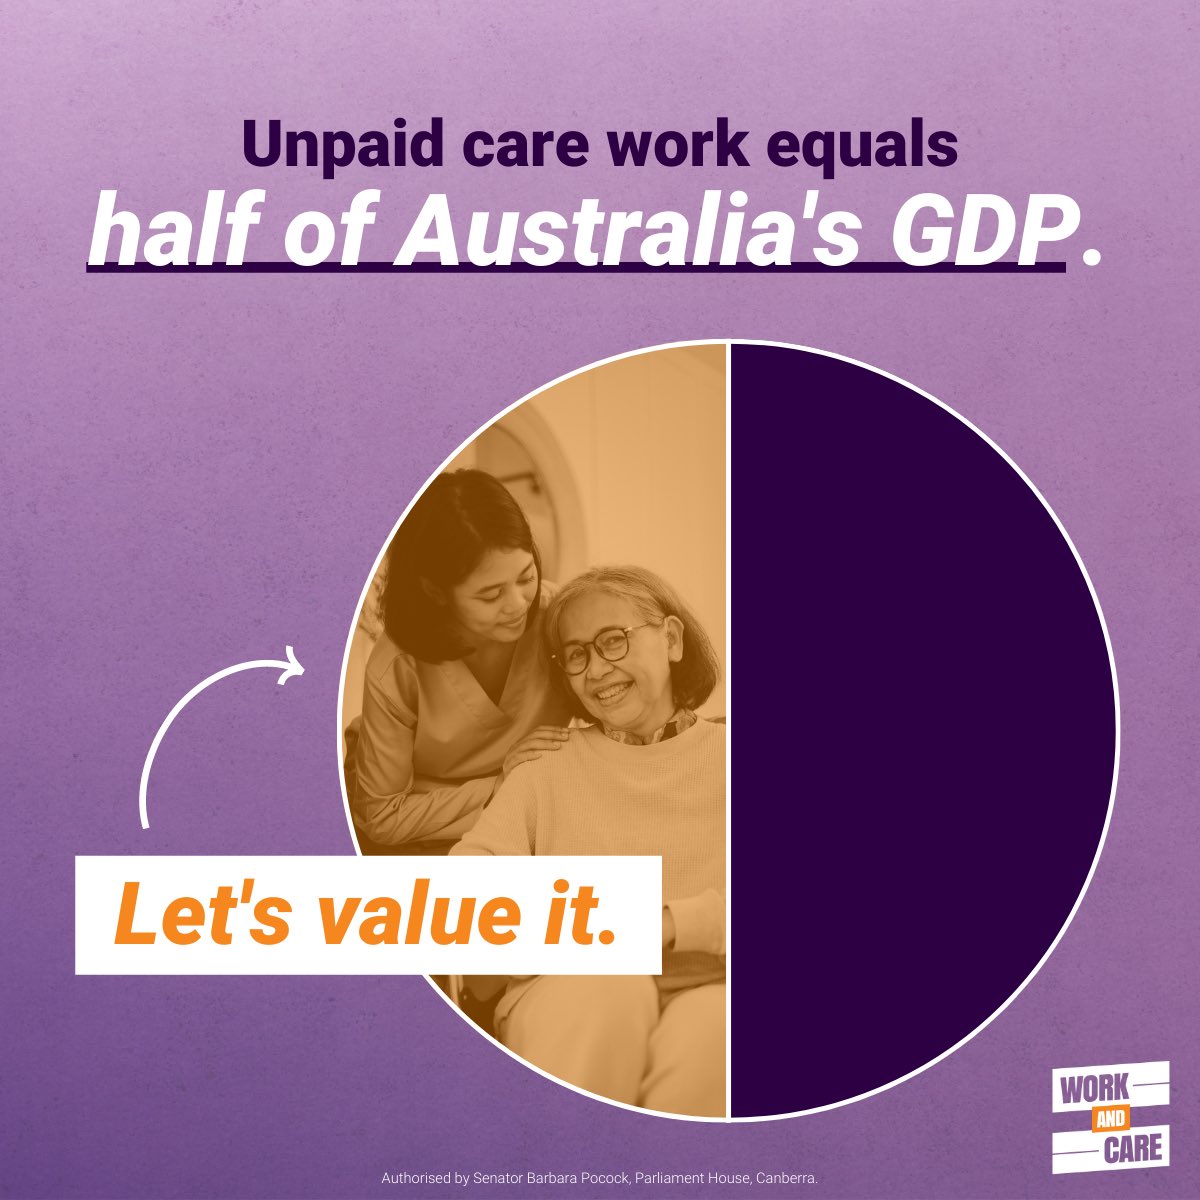 We should be counting how much the contribution of unpaid care wo...